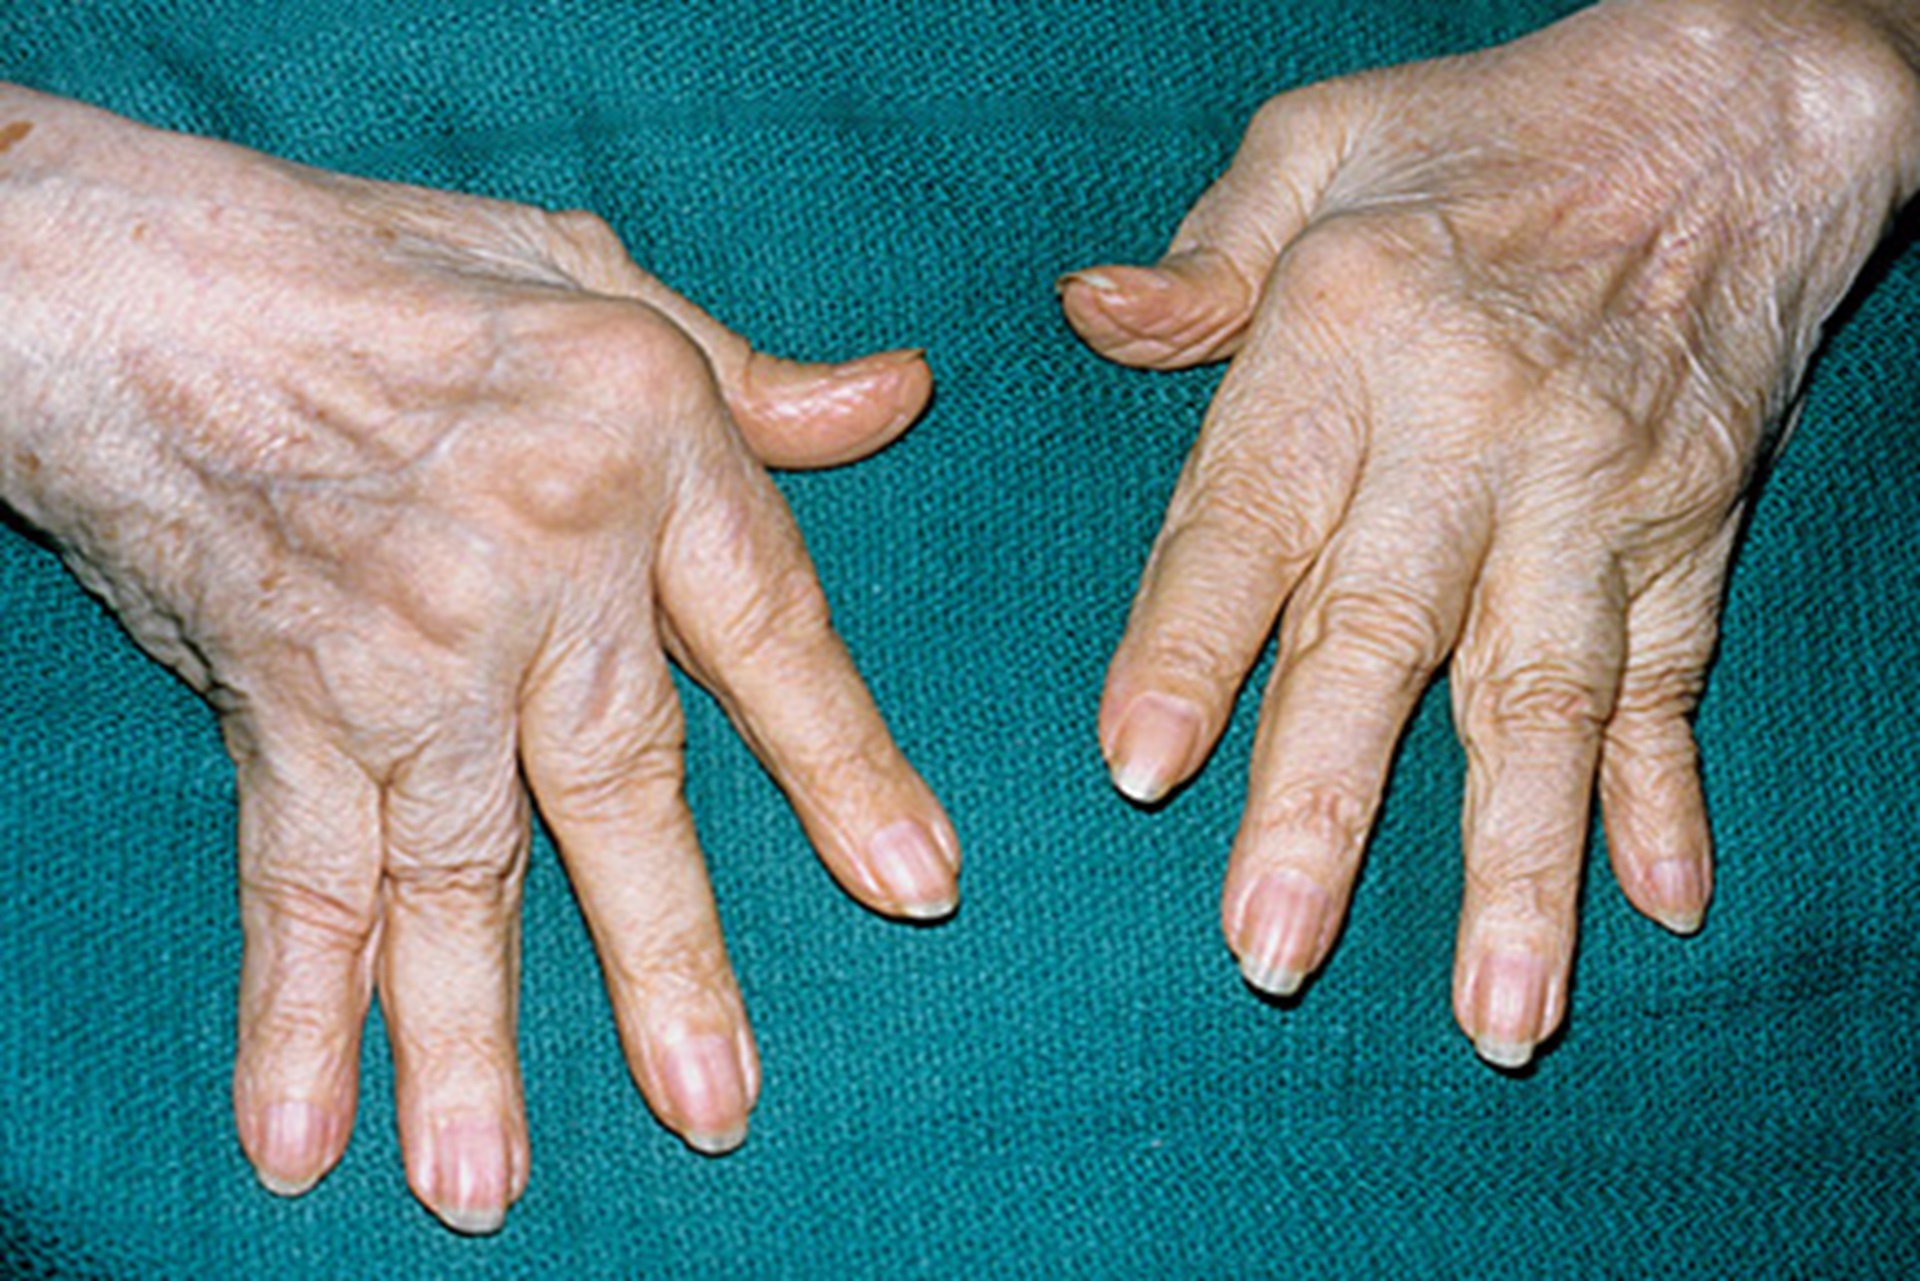 Benefits of Rheumatoid hand surgery in aberdeen, Uk by DR Jamil Ahmed